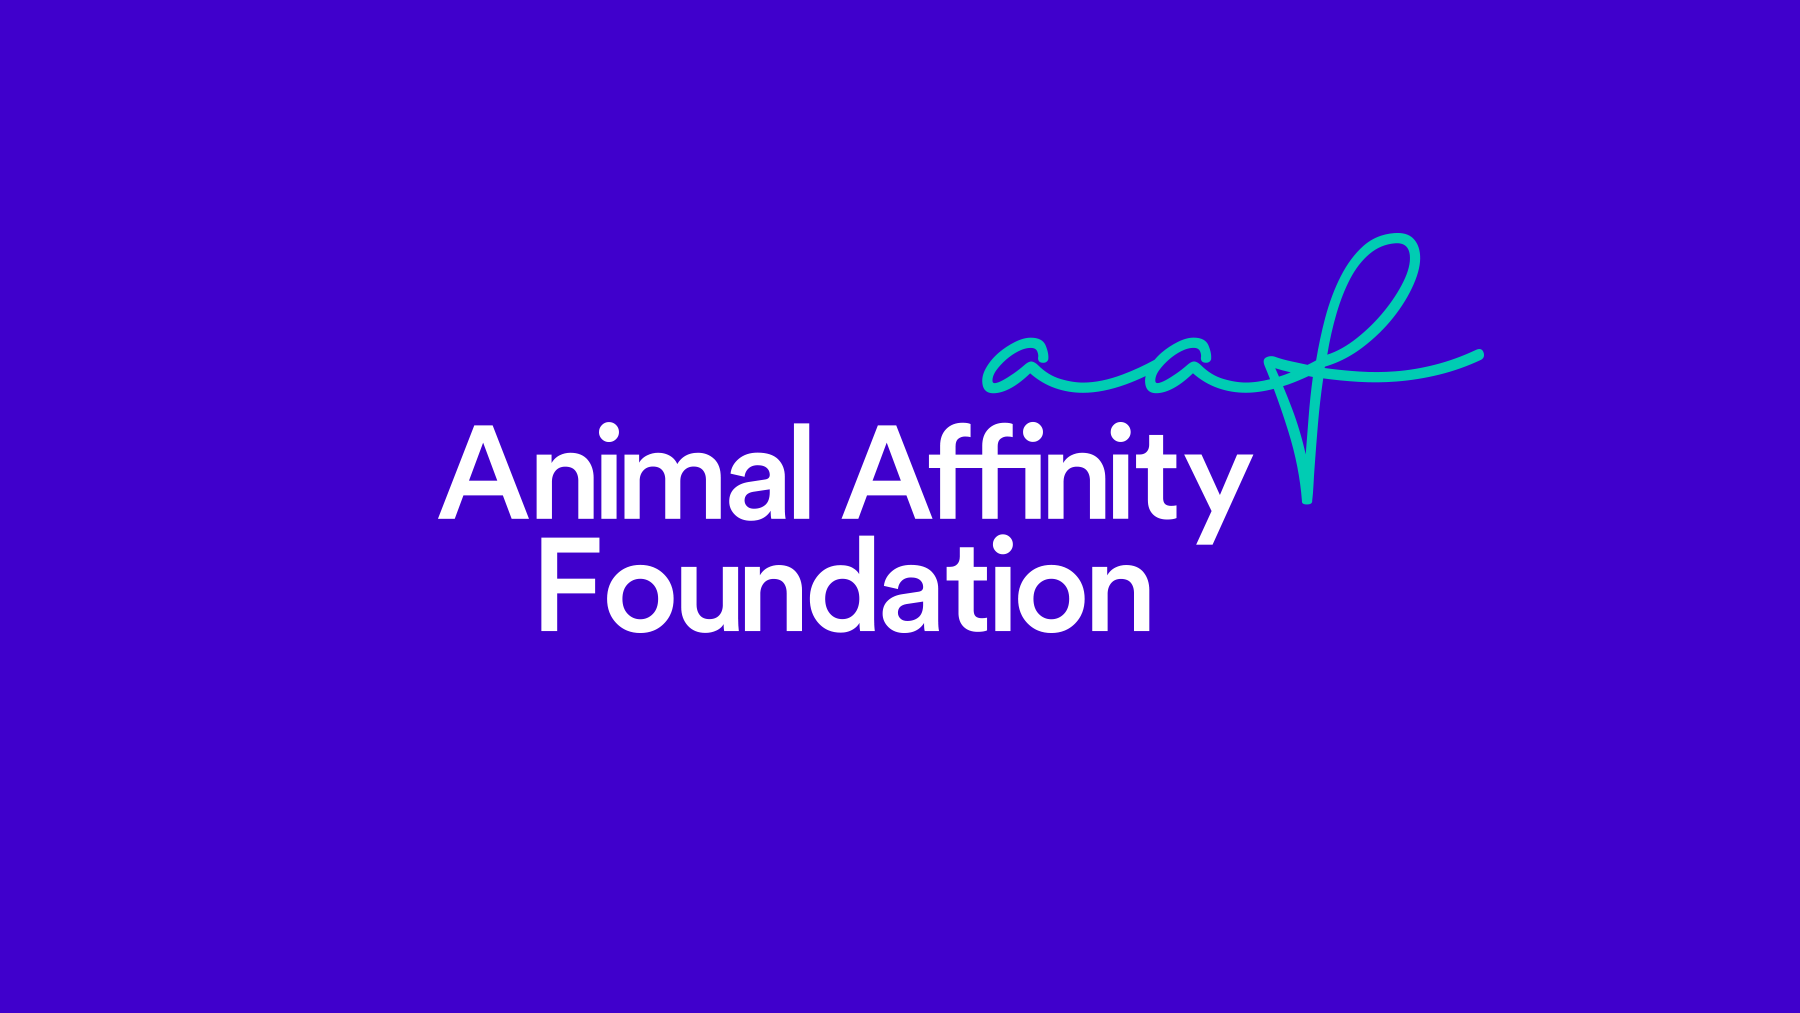 Animal Affinity brand design concept over a solid purple background.